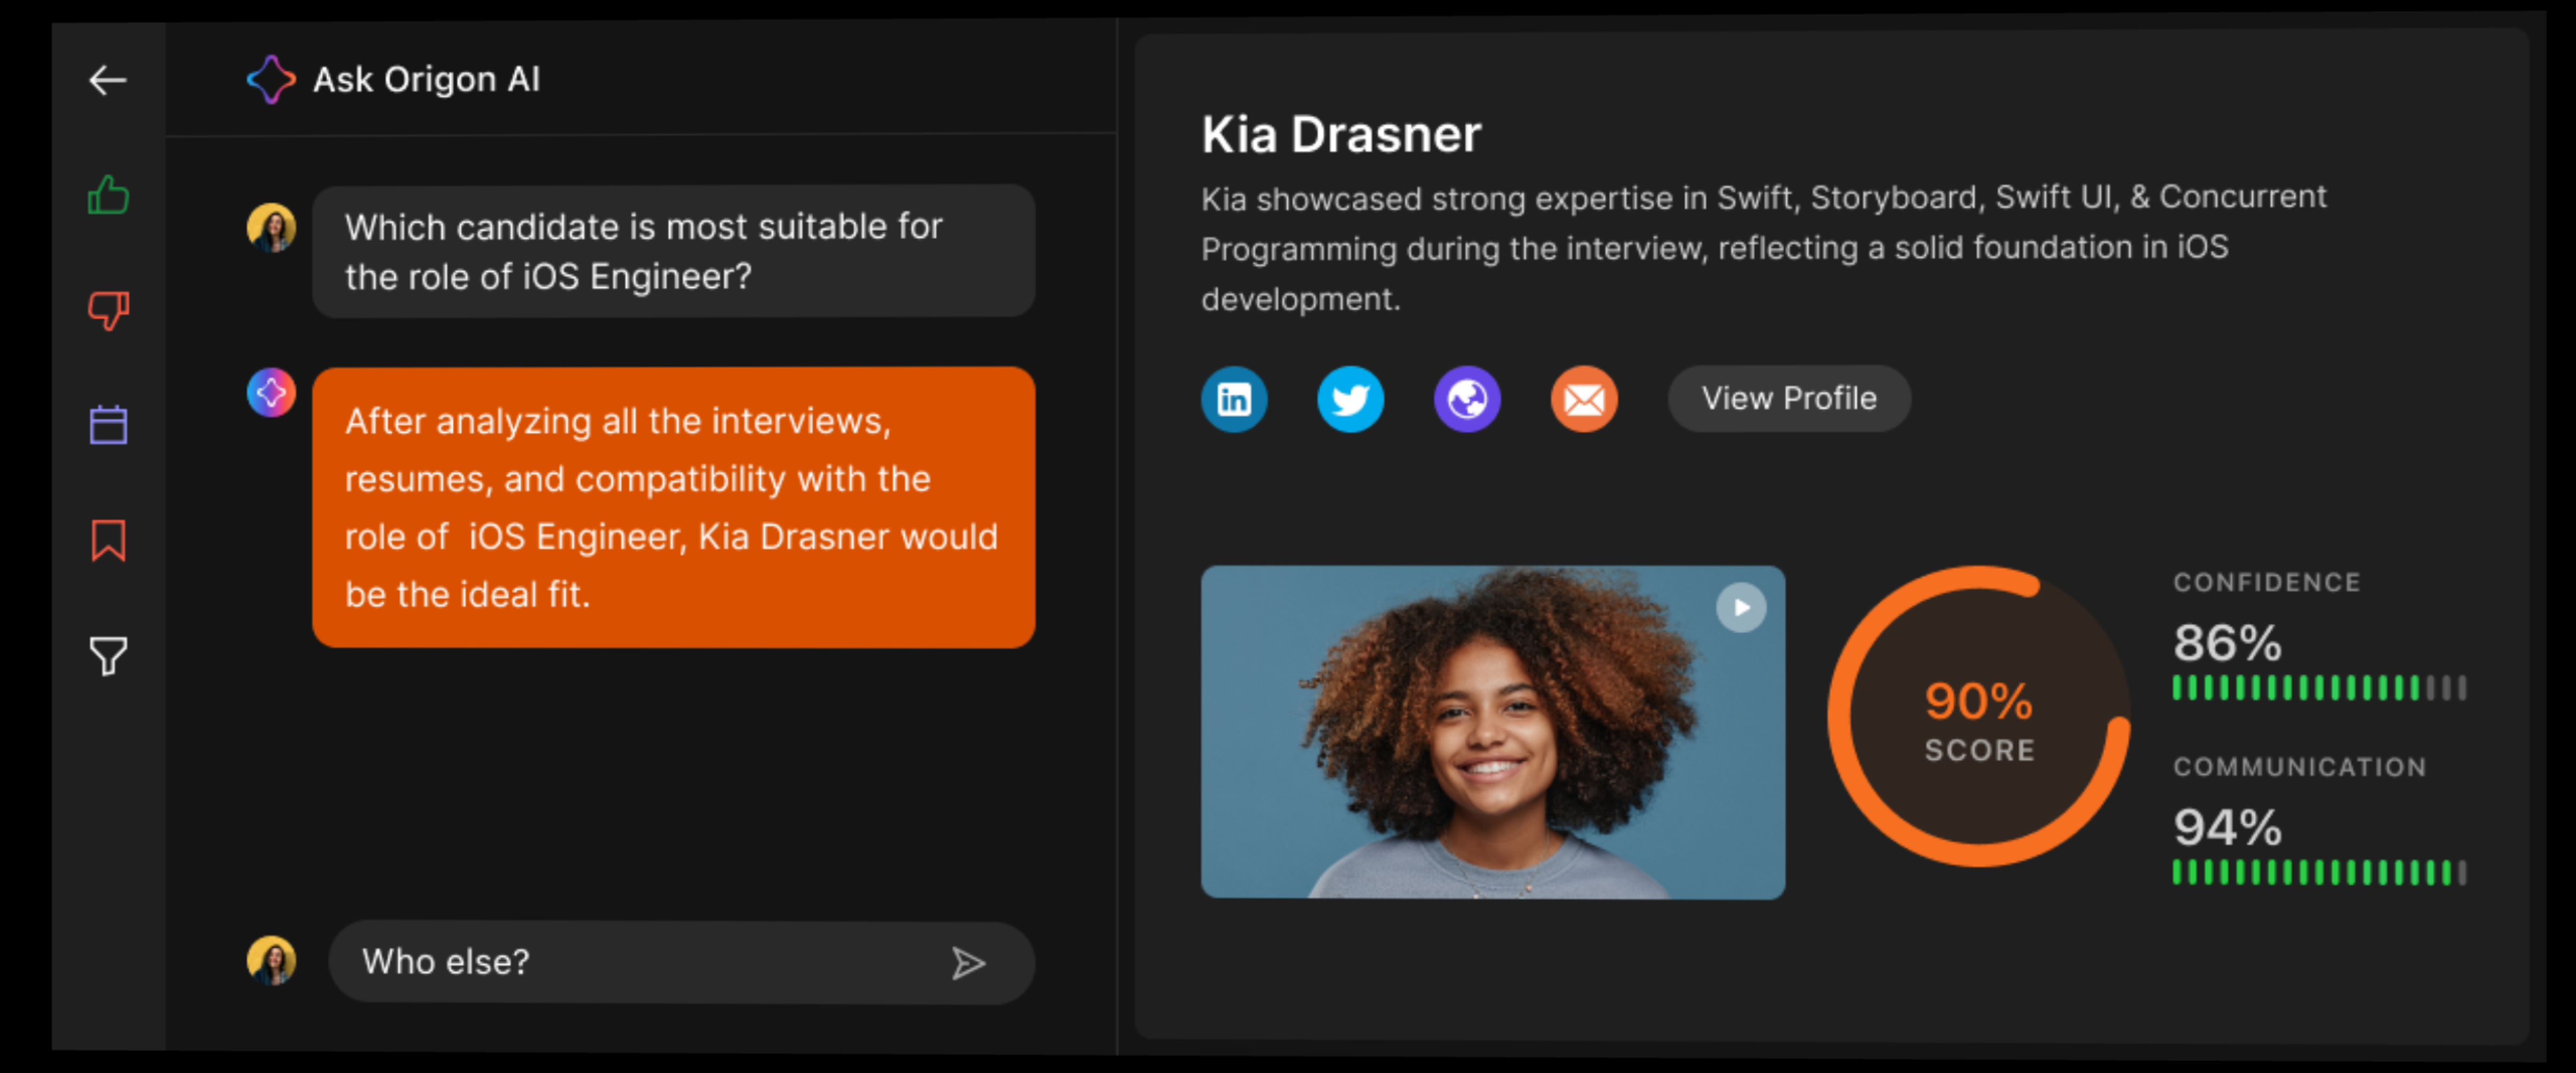 Circle’s interactive AI chat interface recommending Kia Drasner as the top candidate for the iOS Engineer role, with a conversation bubble highlighting her strengths, alongside her profile with a 90% overall score and high confidence and communication ratings.